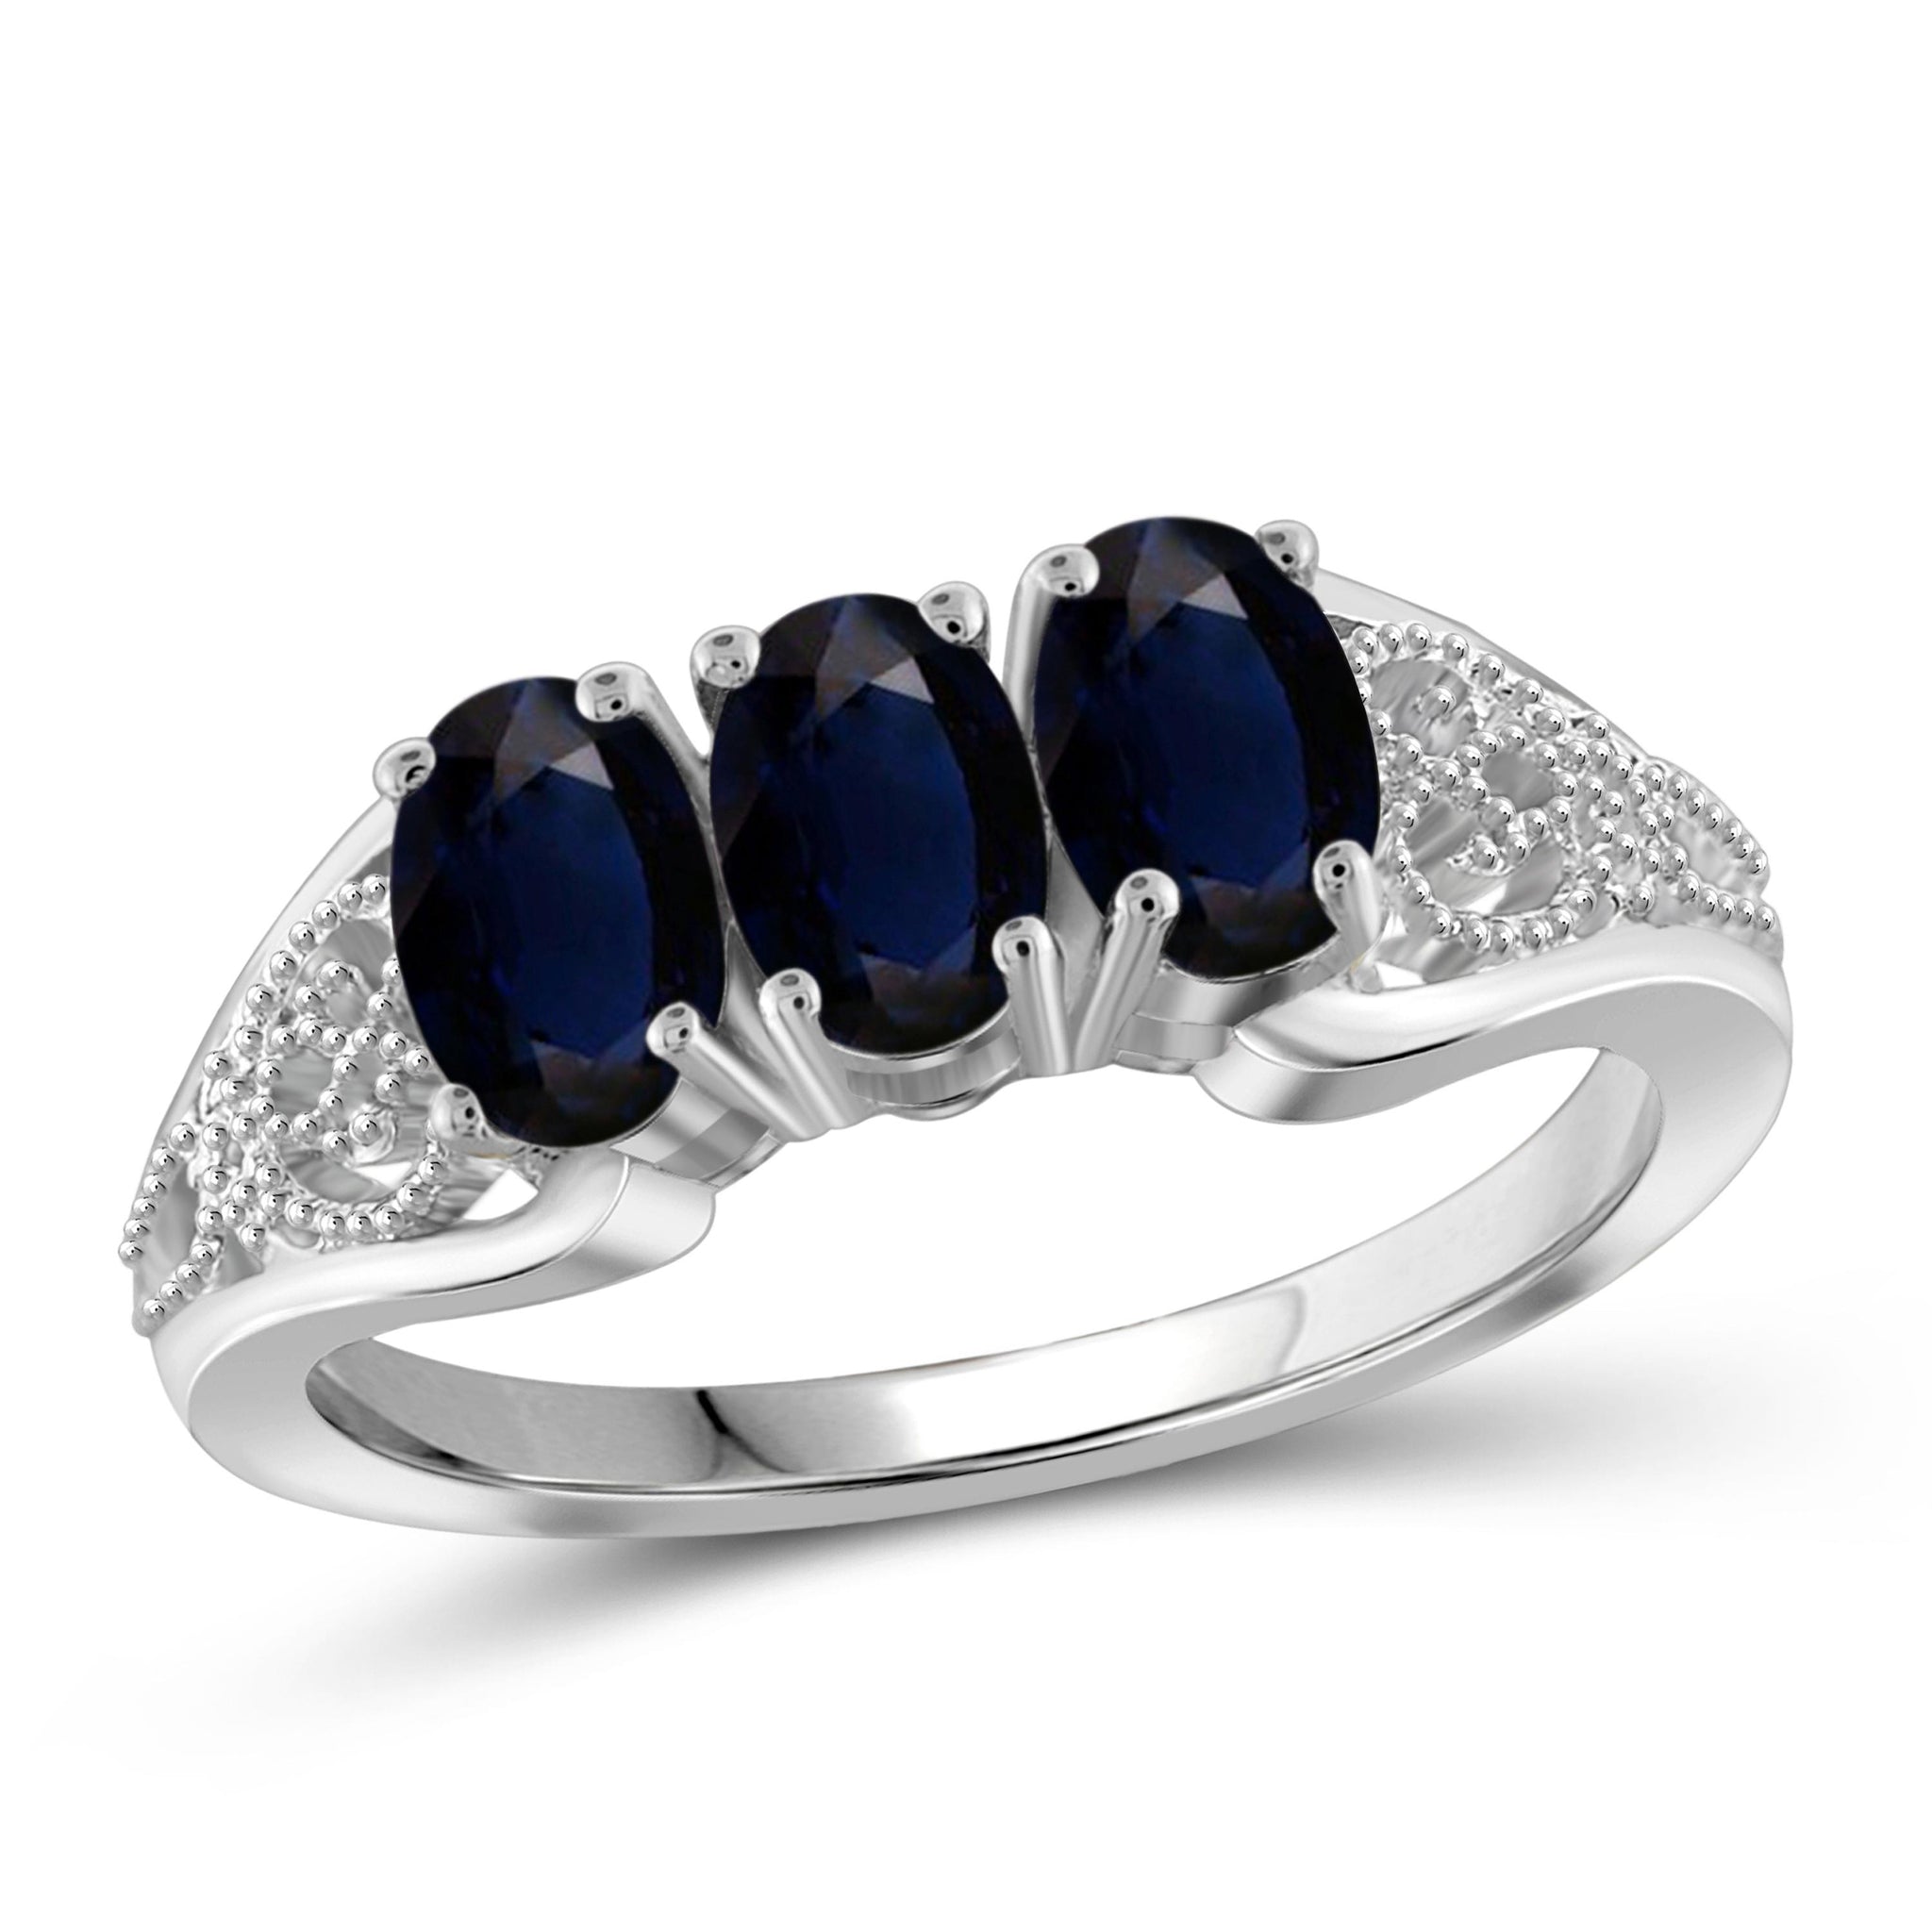 JewelonFire 2.00 Carat T.G.W. Sapphire Sterling Silver Ring - Assorted Colors